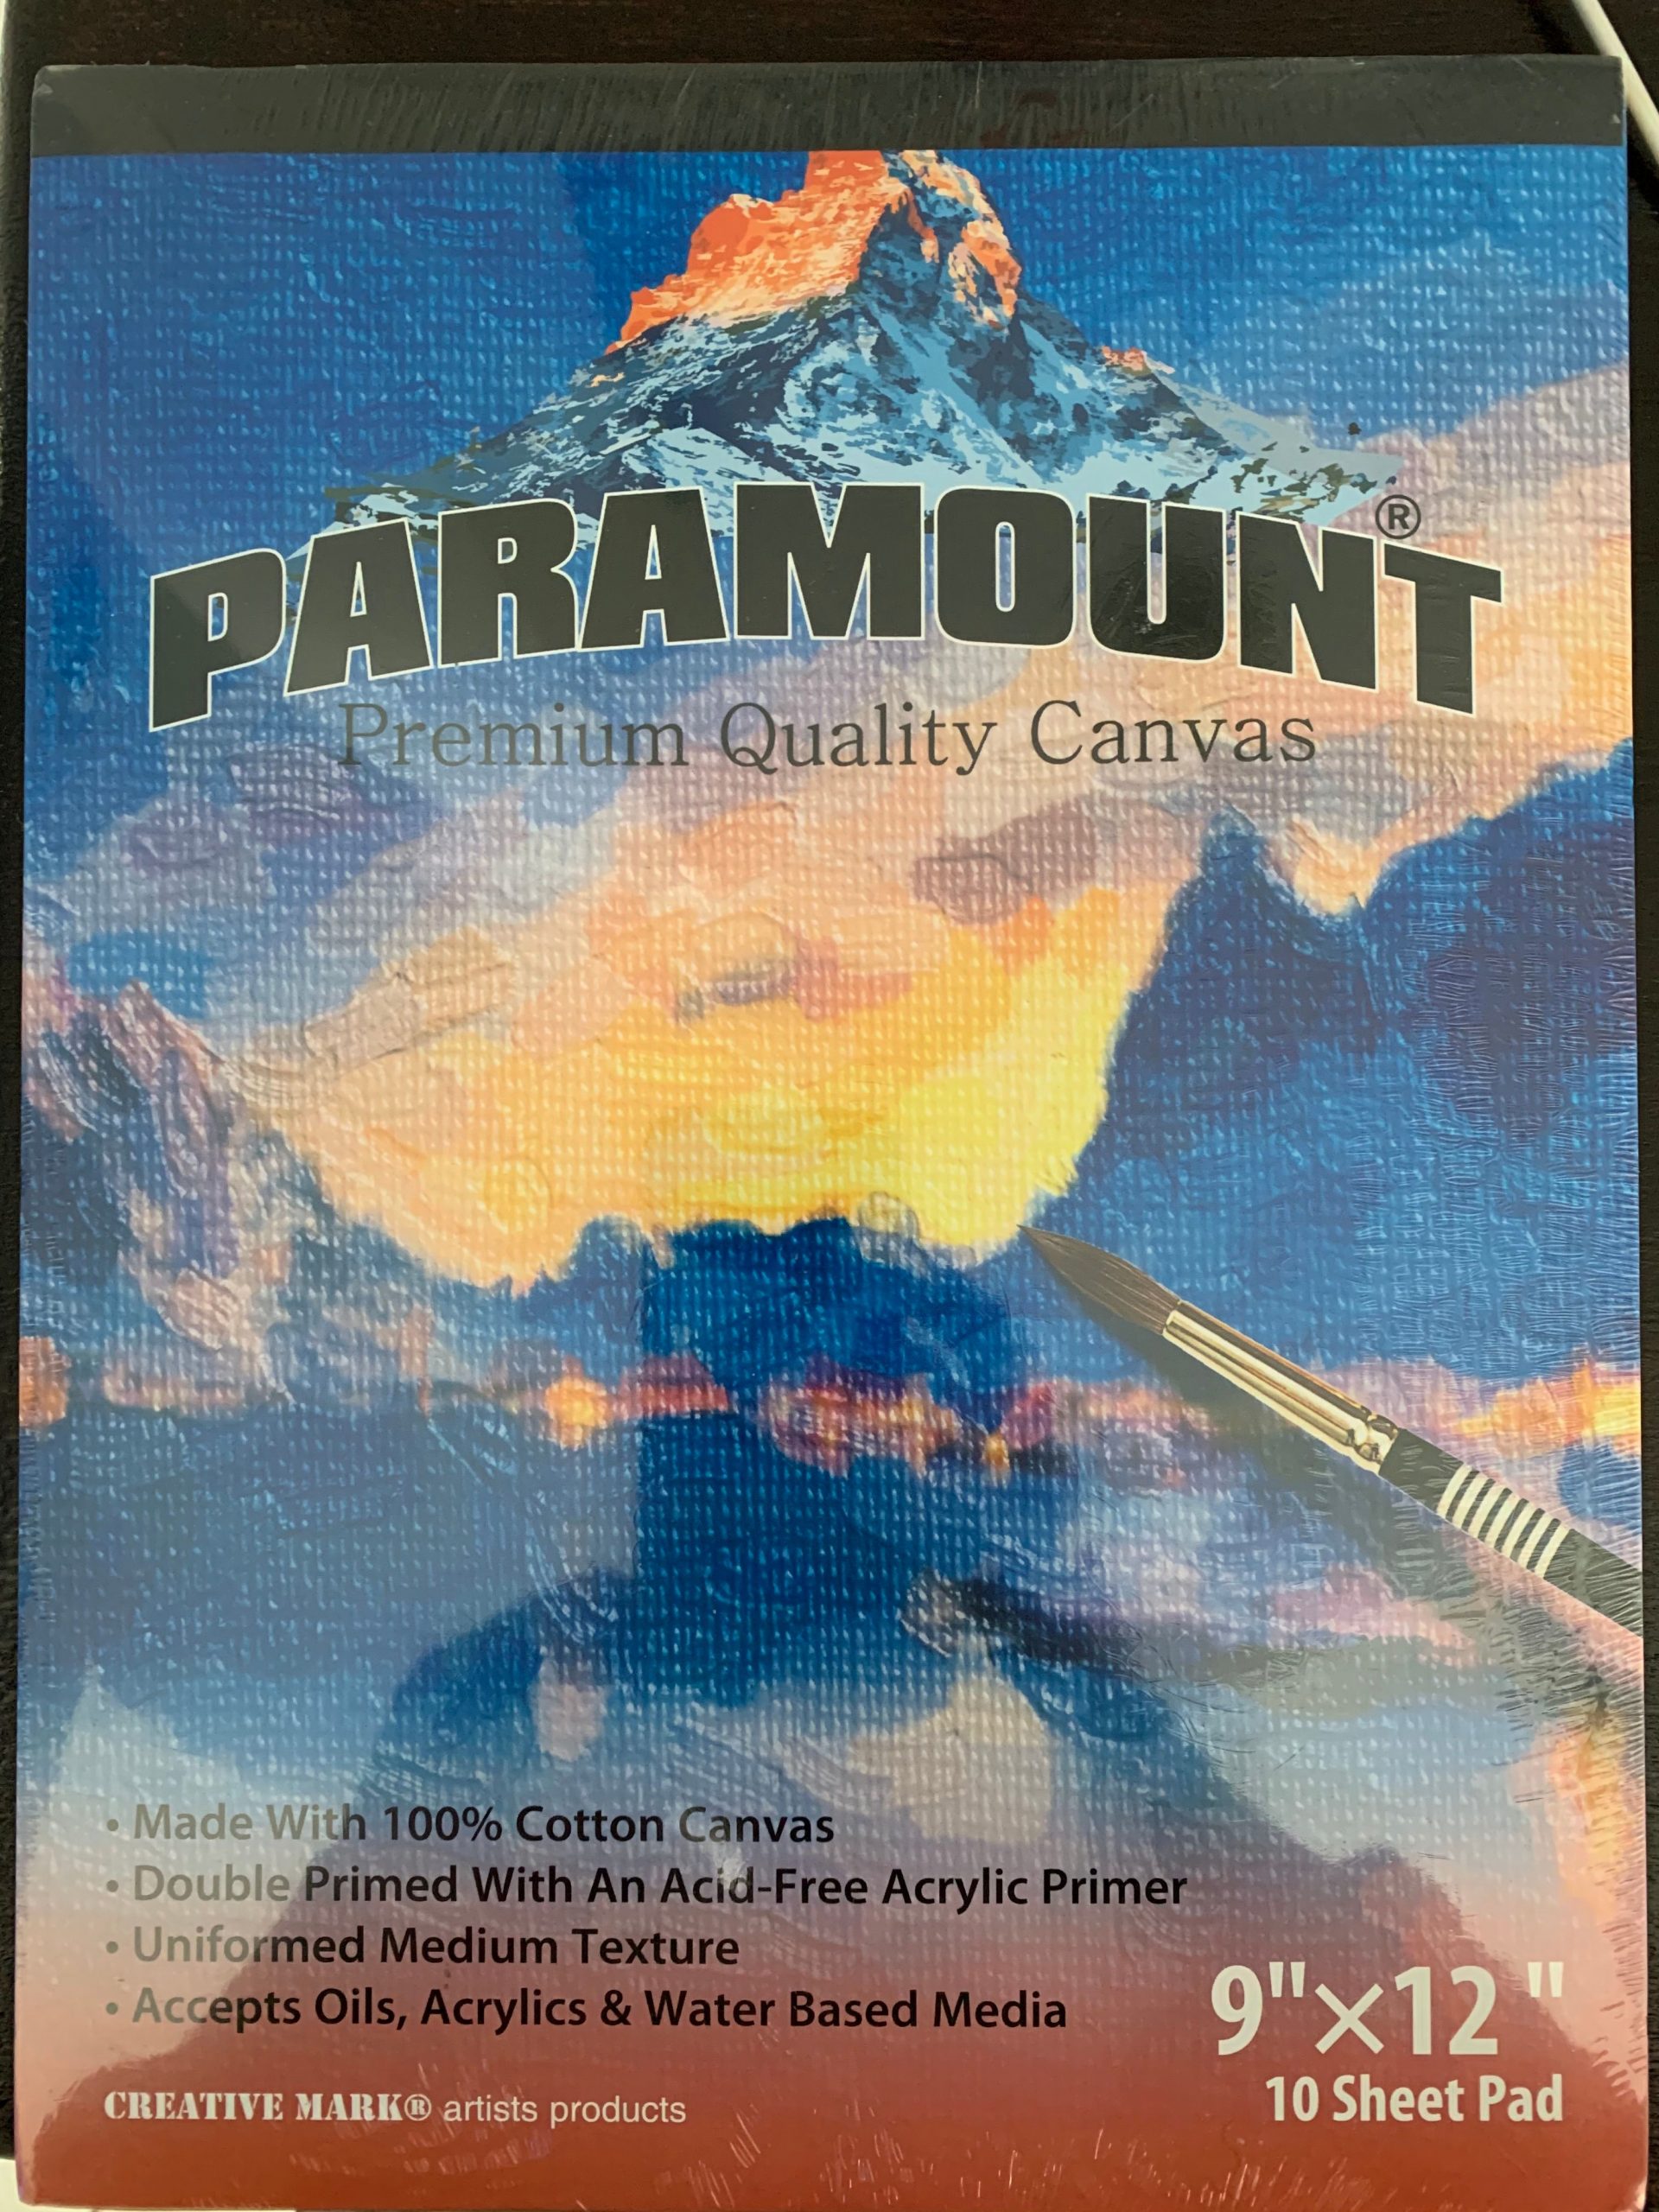  Paramount premium quality canvas - a great addition to any oil painting supplies list.